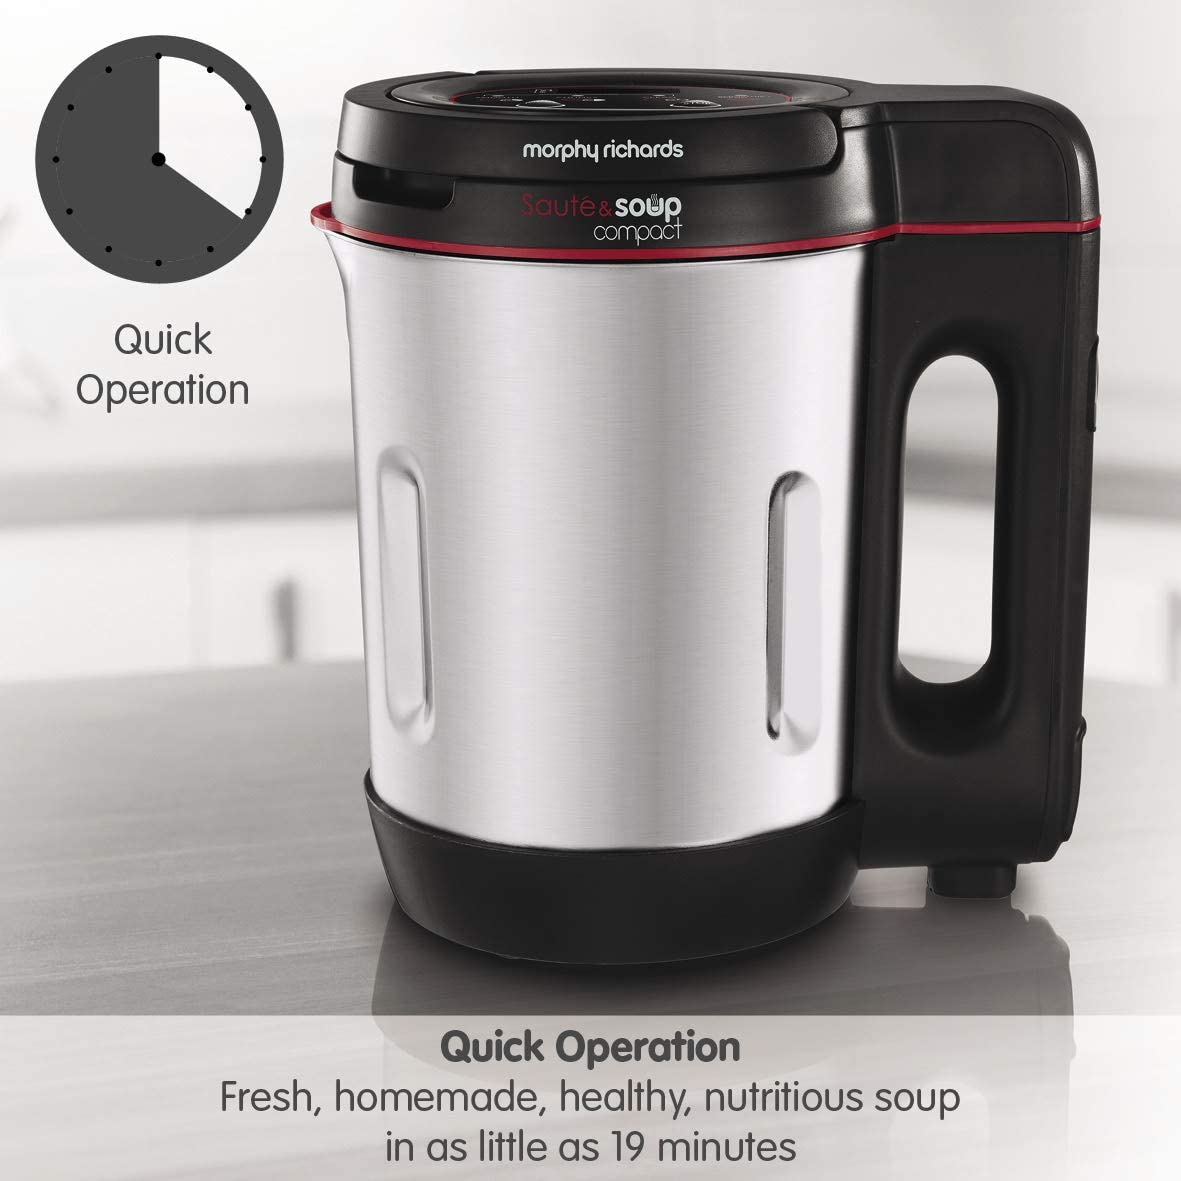 Morphy Richards 501027 Compact Saute & Soup Maker, Stainless Steel, 900 W, 1 Liter, Brushed Aluminium and Black